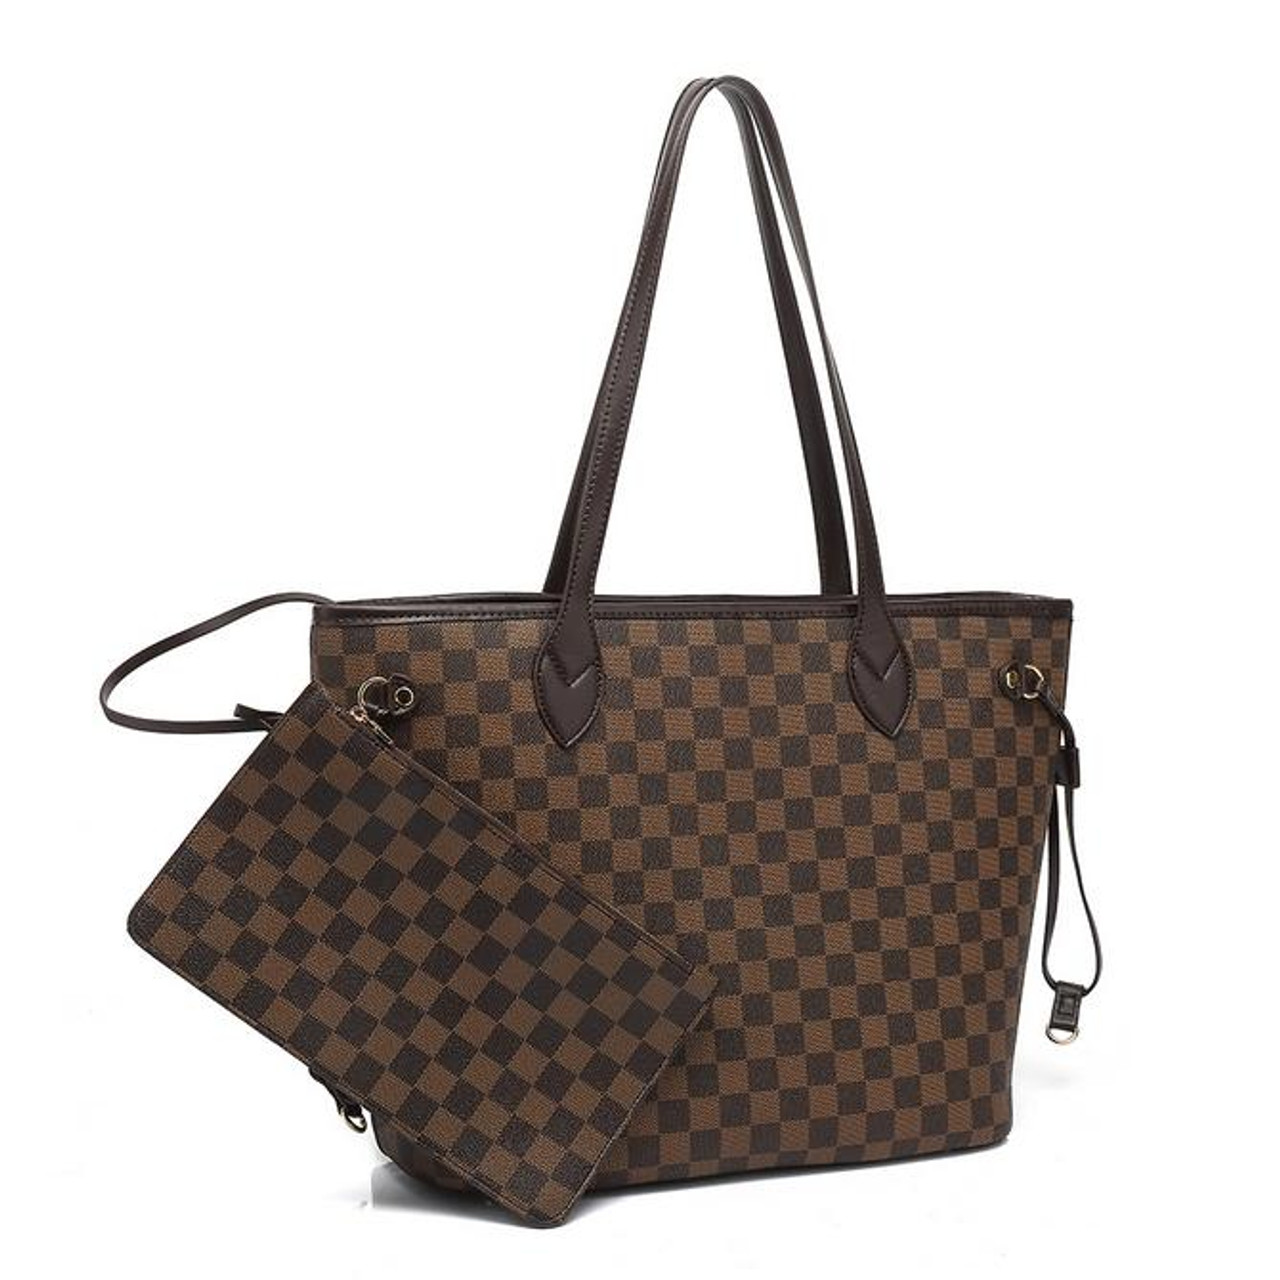 My Favorite Checkered Tote Bag + Louis Vuitton Neverfull Look Alike